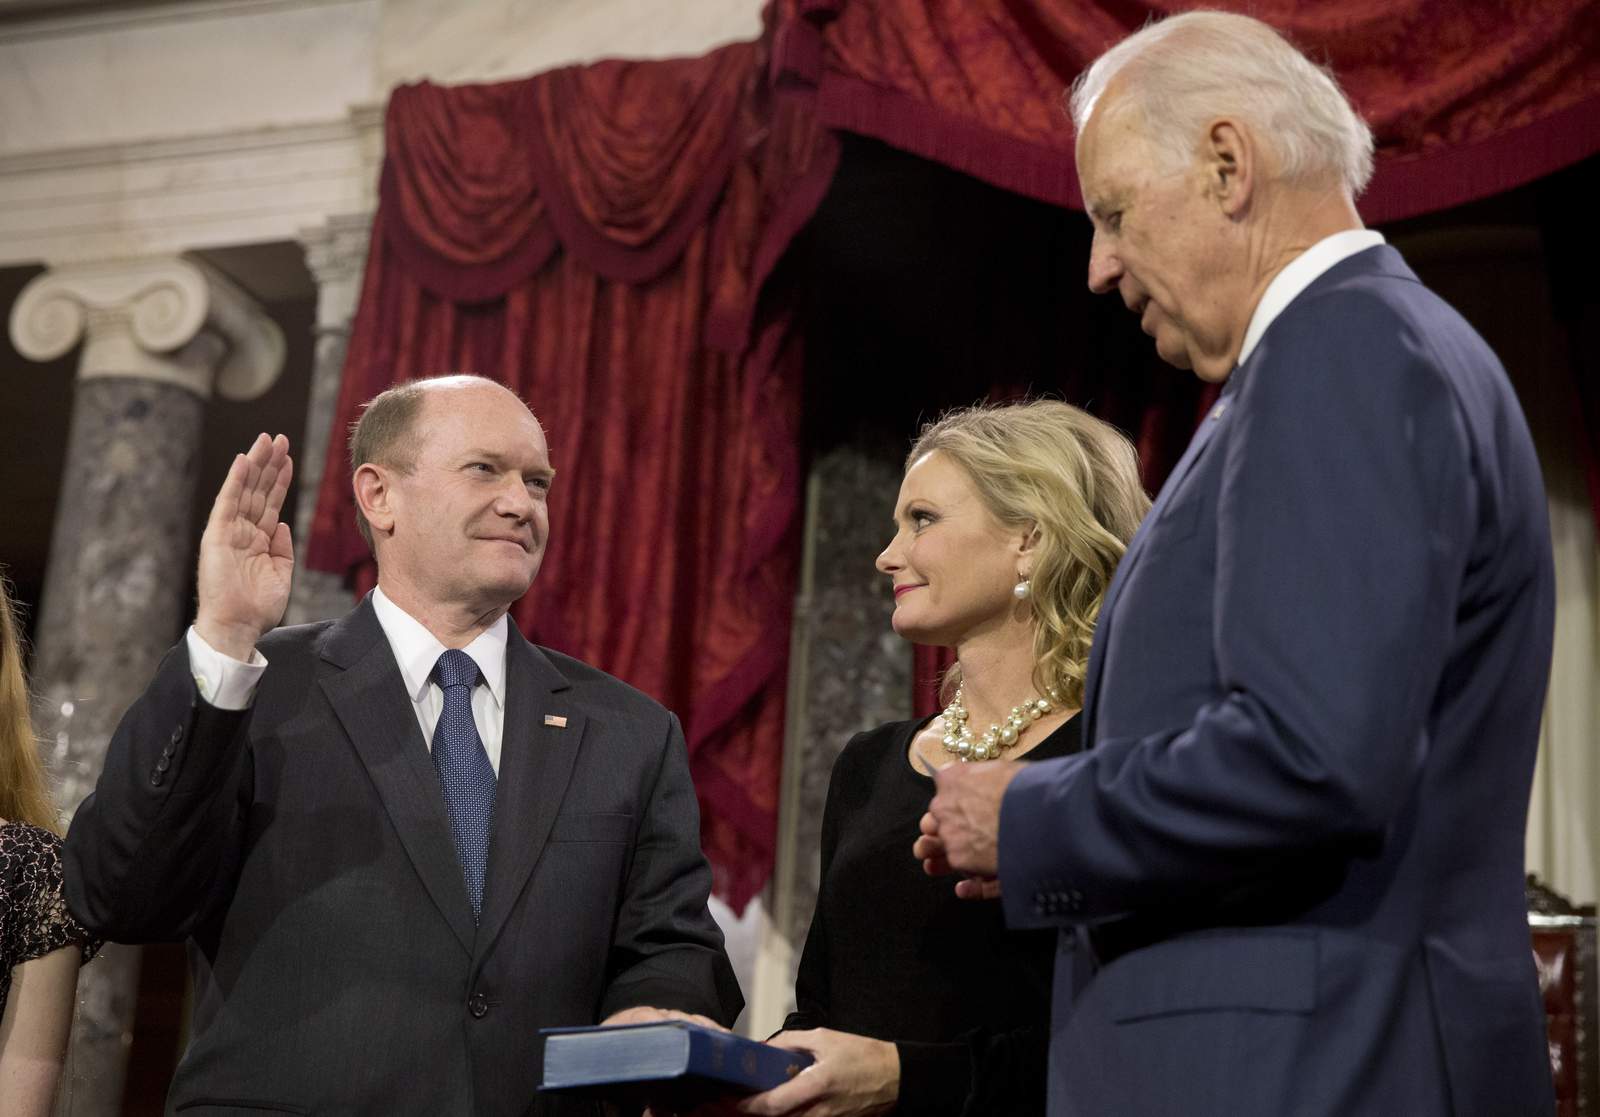 Biden friend Sen. Coons to elevate faith on convention stage